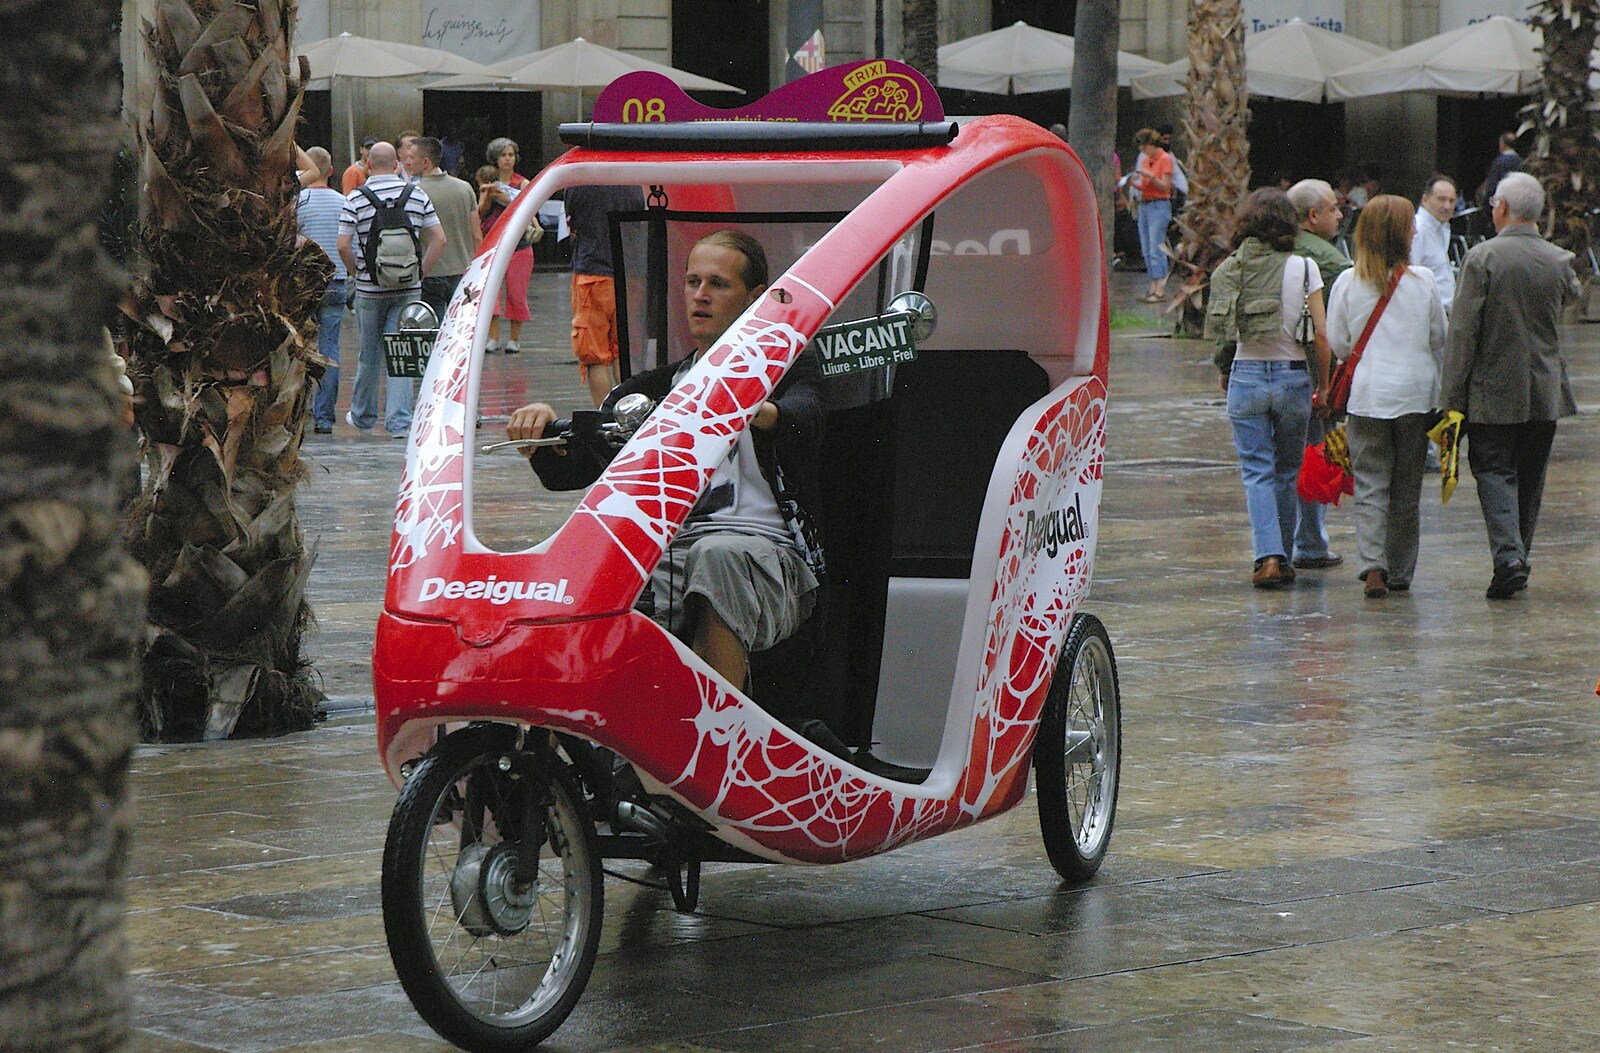 A pedal taxi from Two Days in Barcelona, Catalunya, Spain - 22nd September 2006